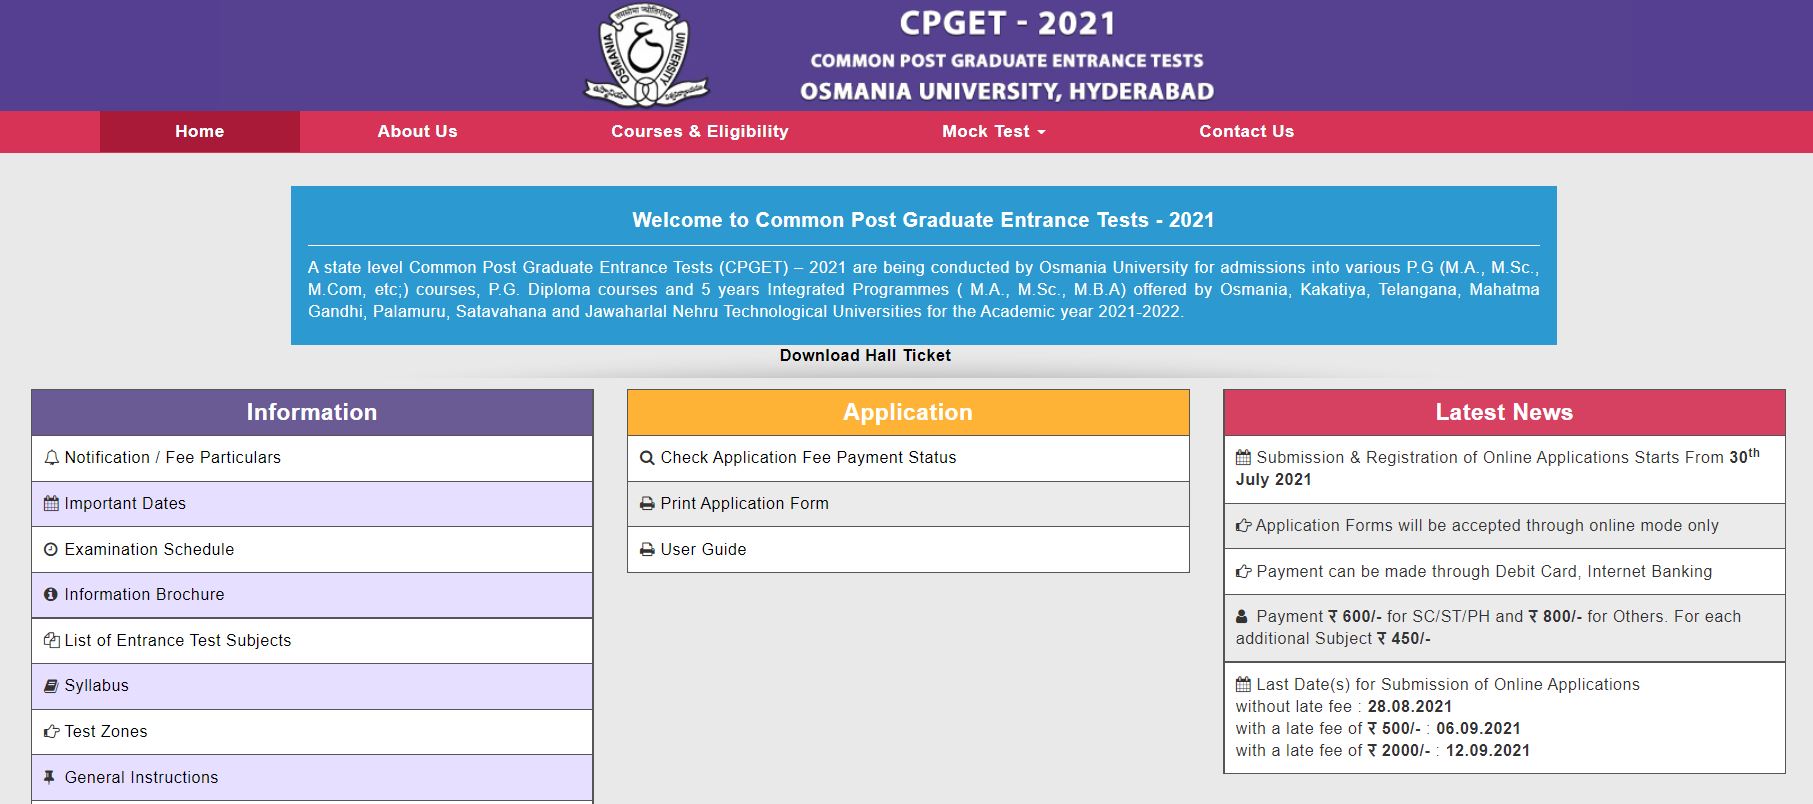 TS CPGET Results 2021